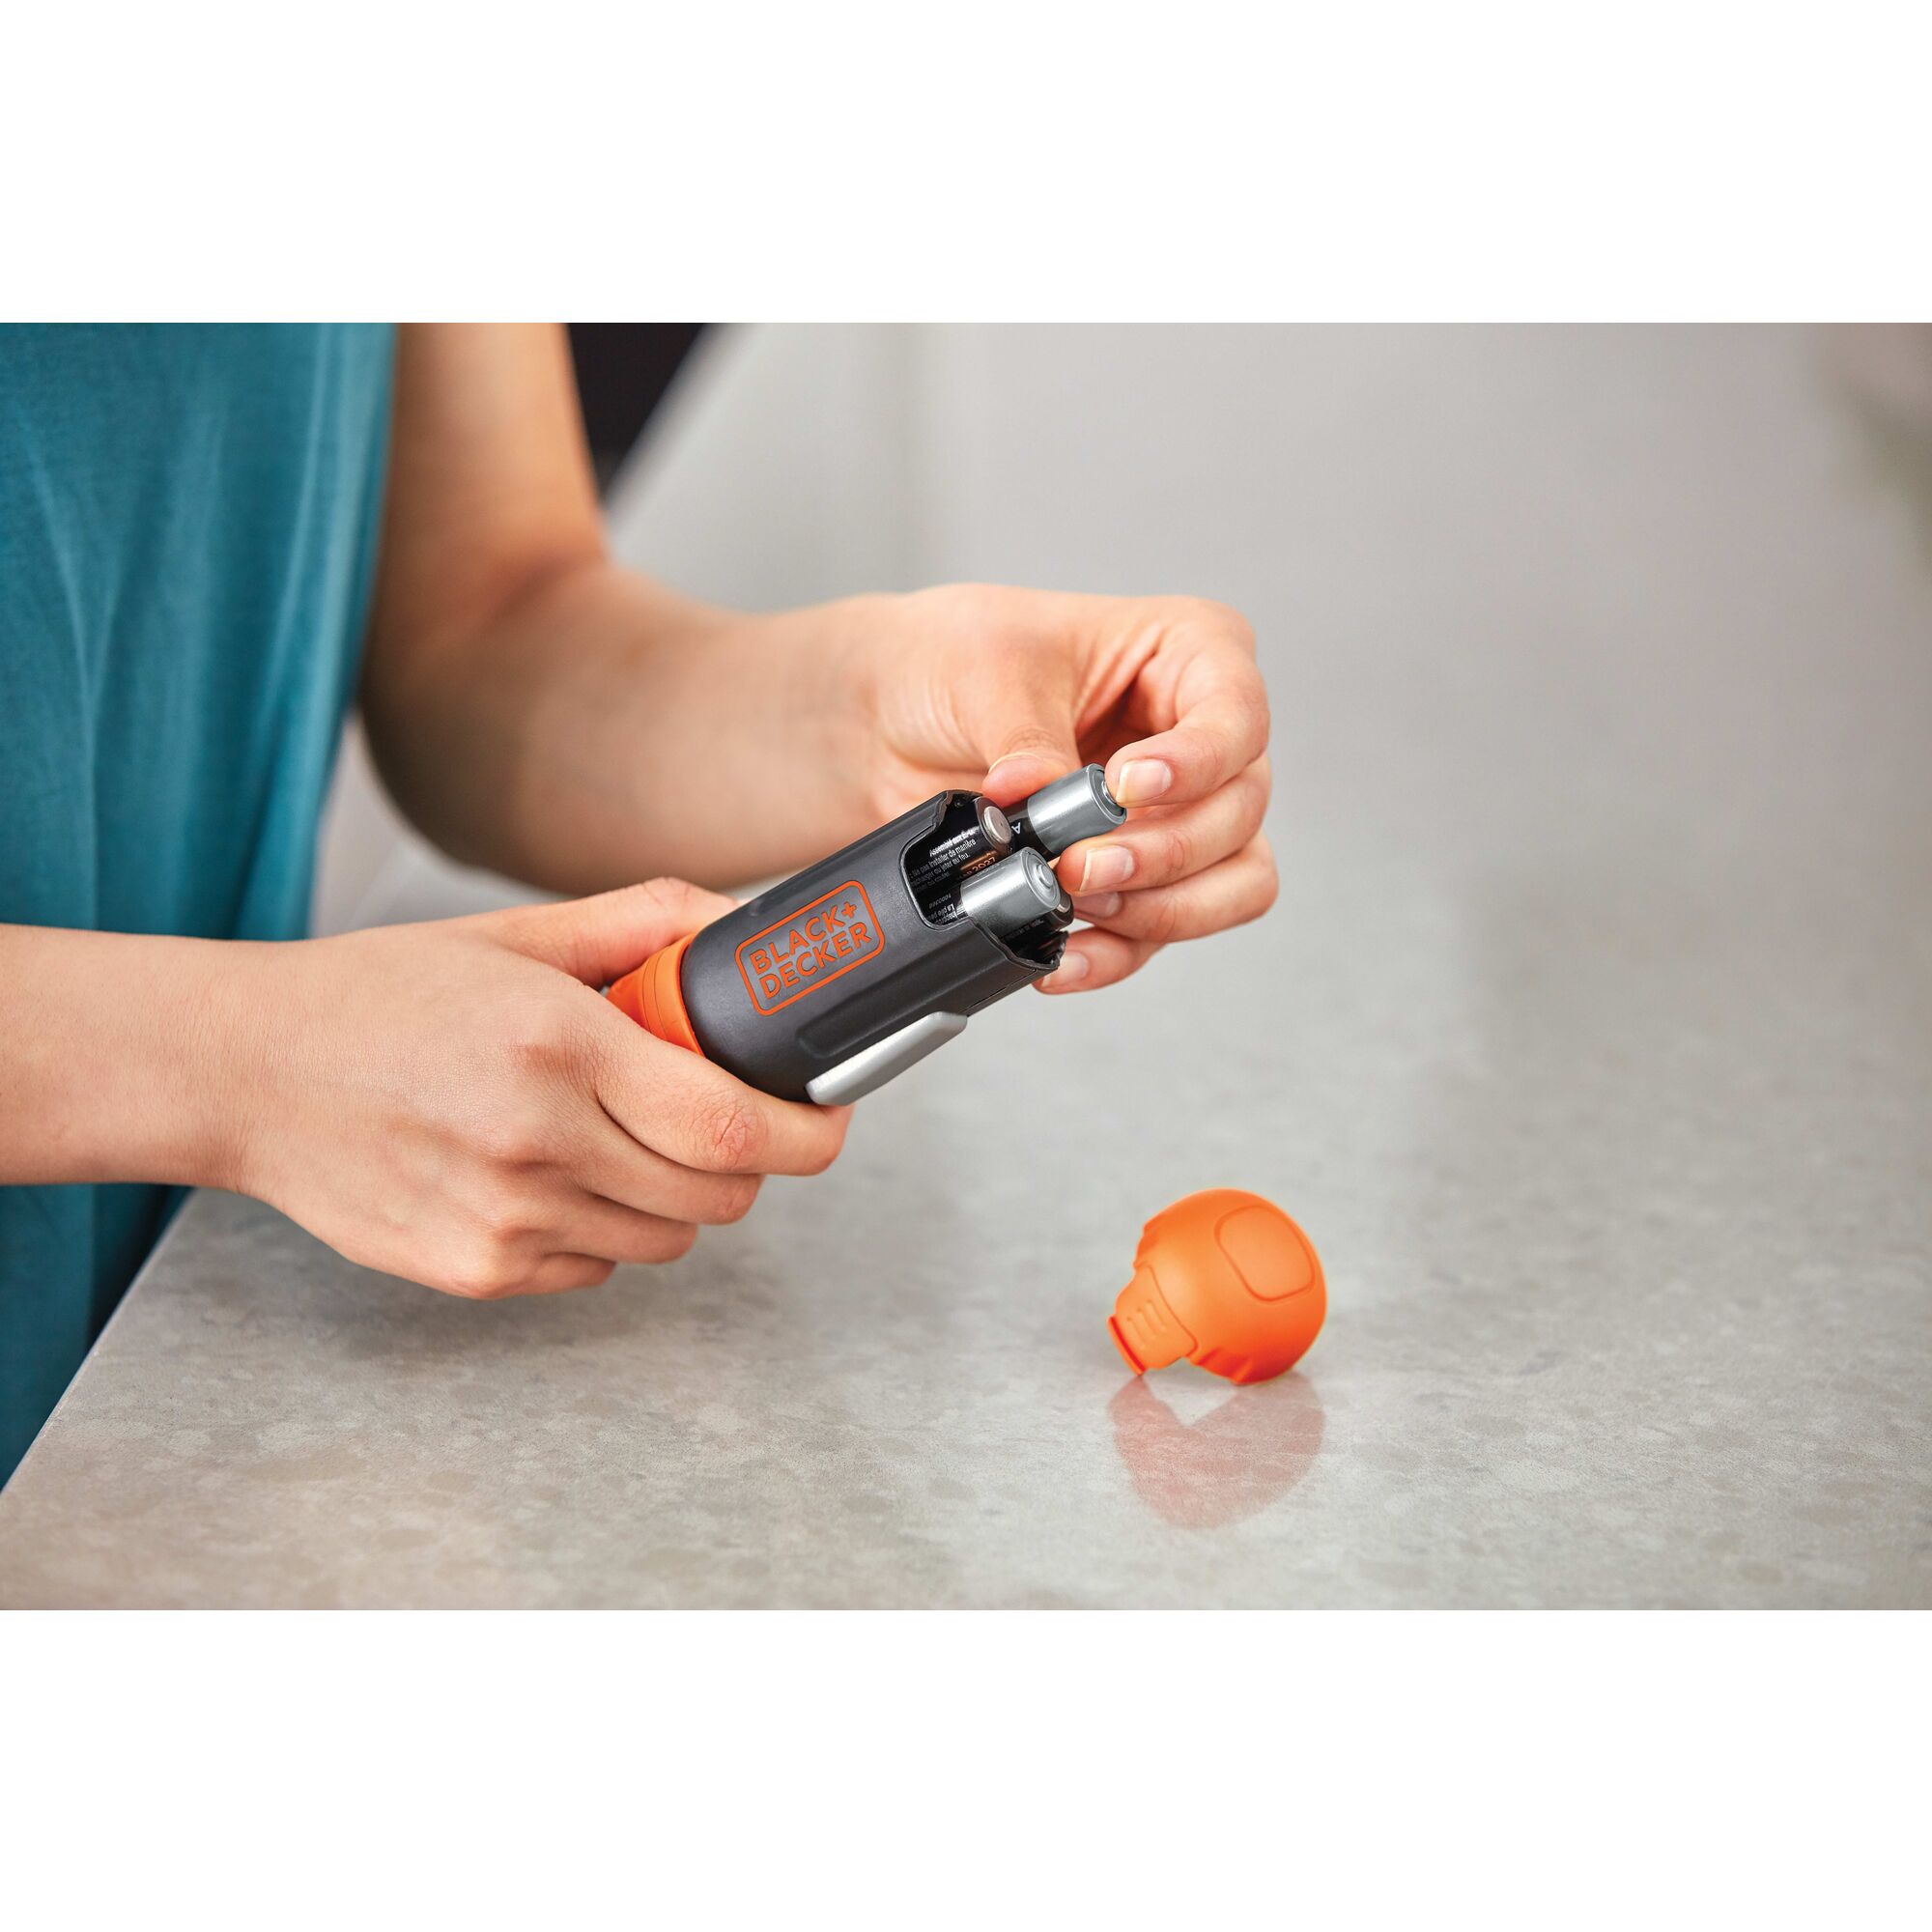 A A Battery feature of cordless power driver screwdriver with extensions shaft.